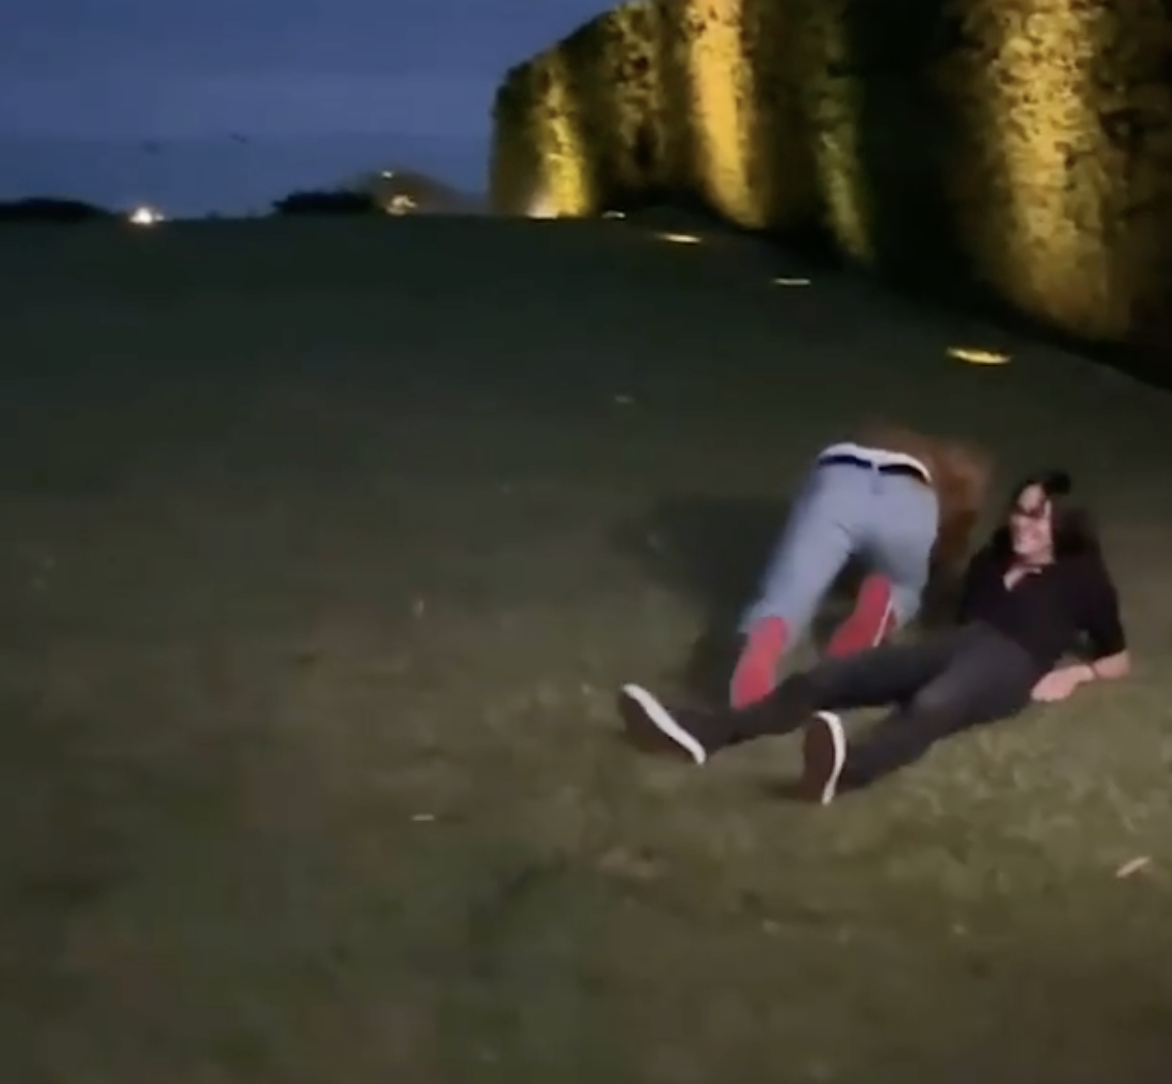 Ed and Courteney on the ground